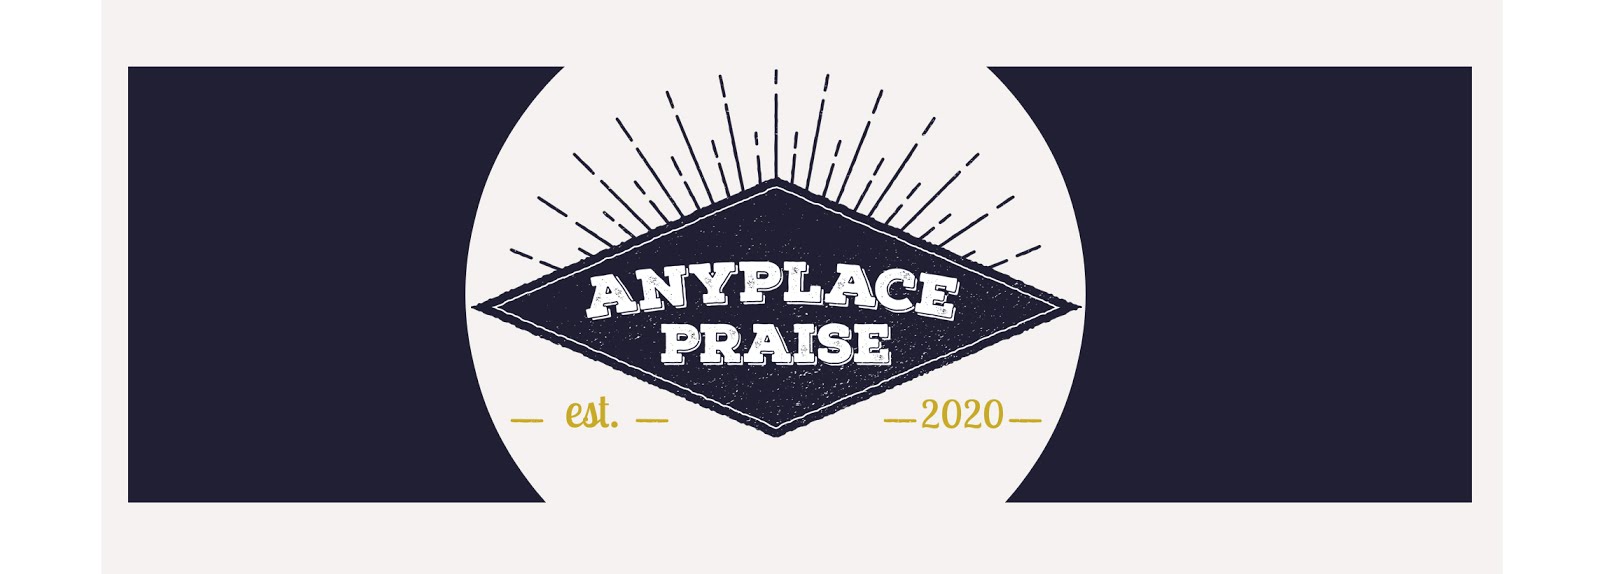 Anyplace Praise